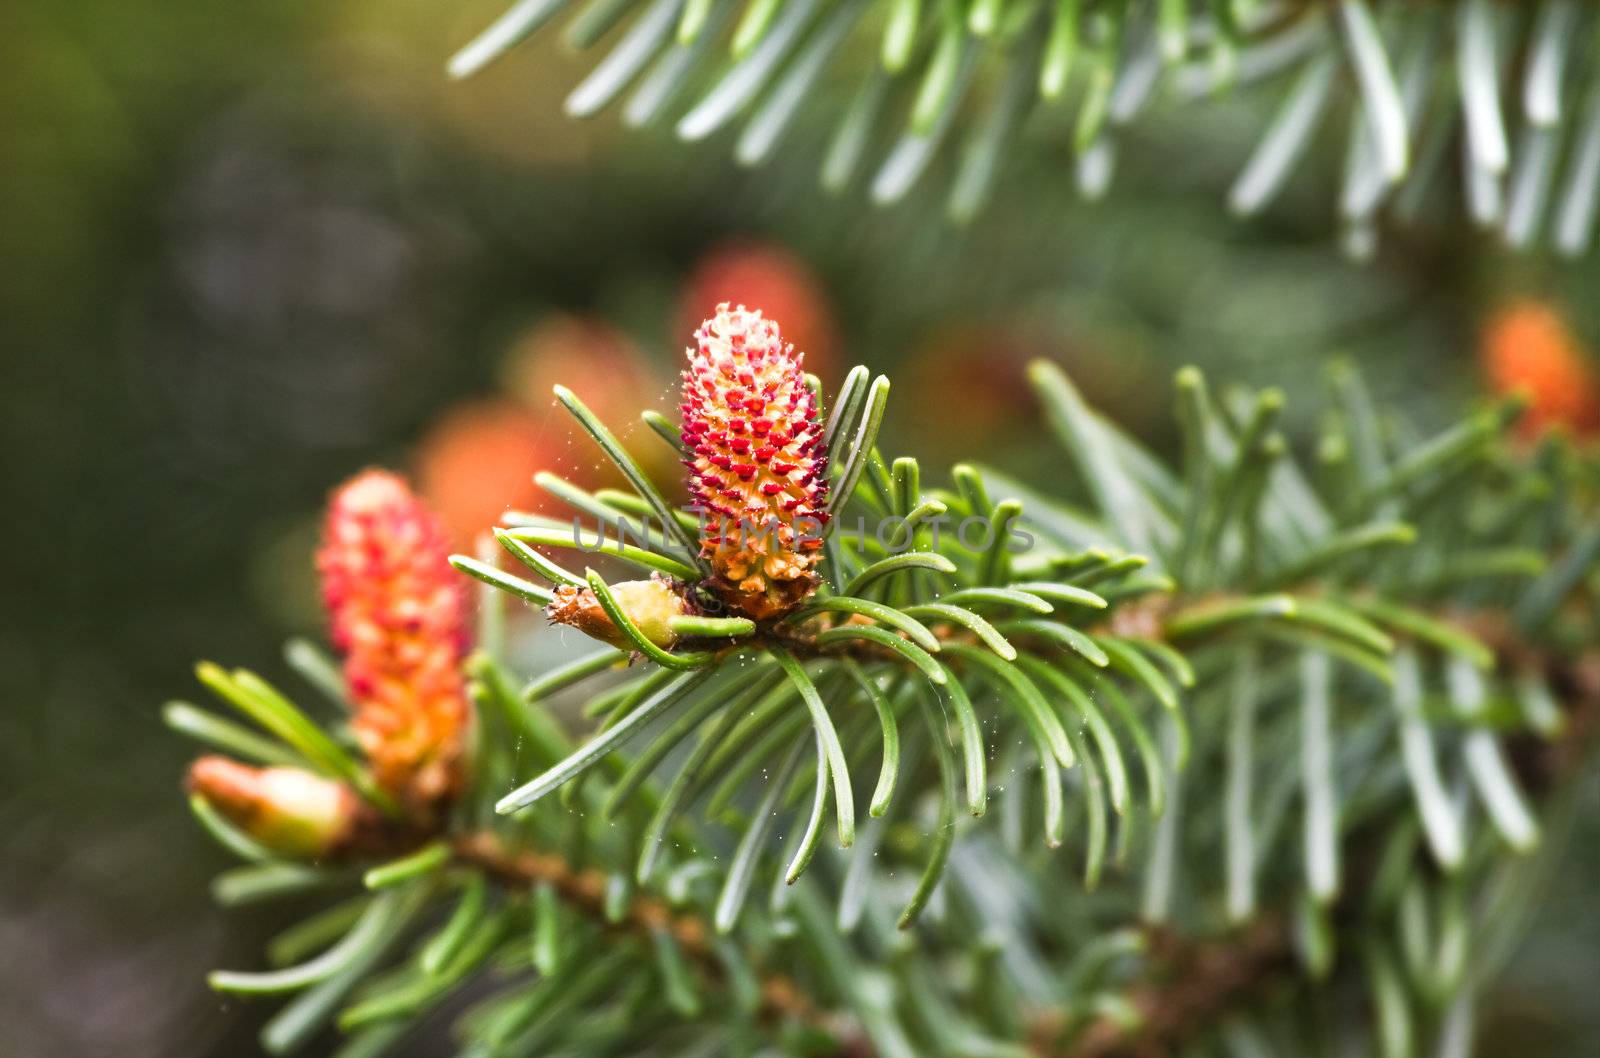 Spring flowers on Spruce or Picea abies by Colette